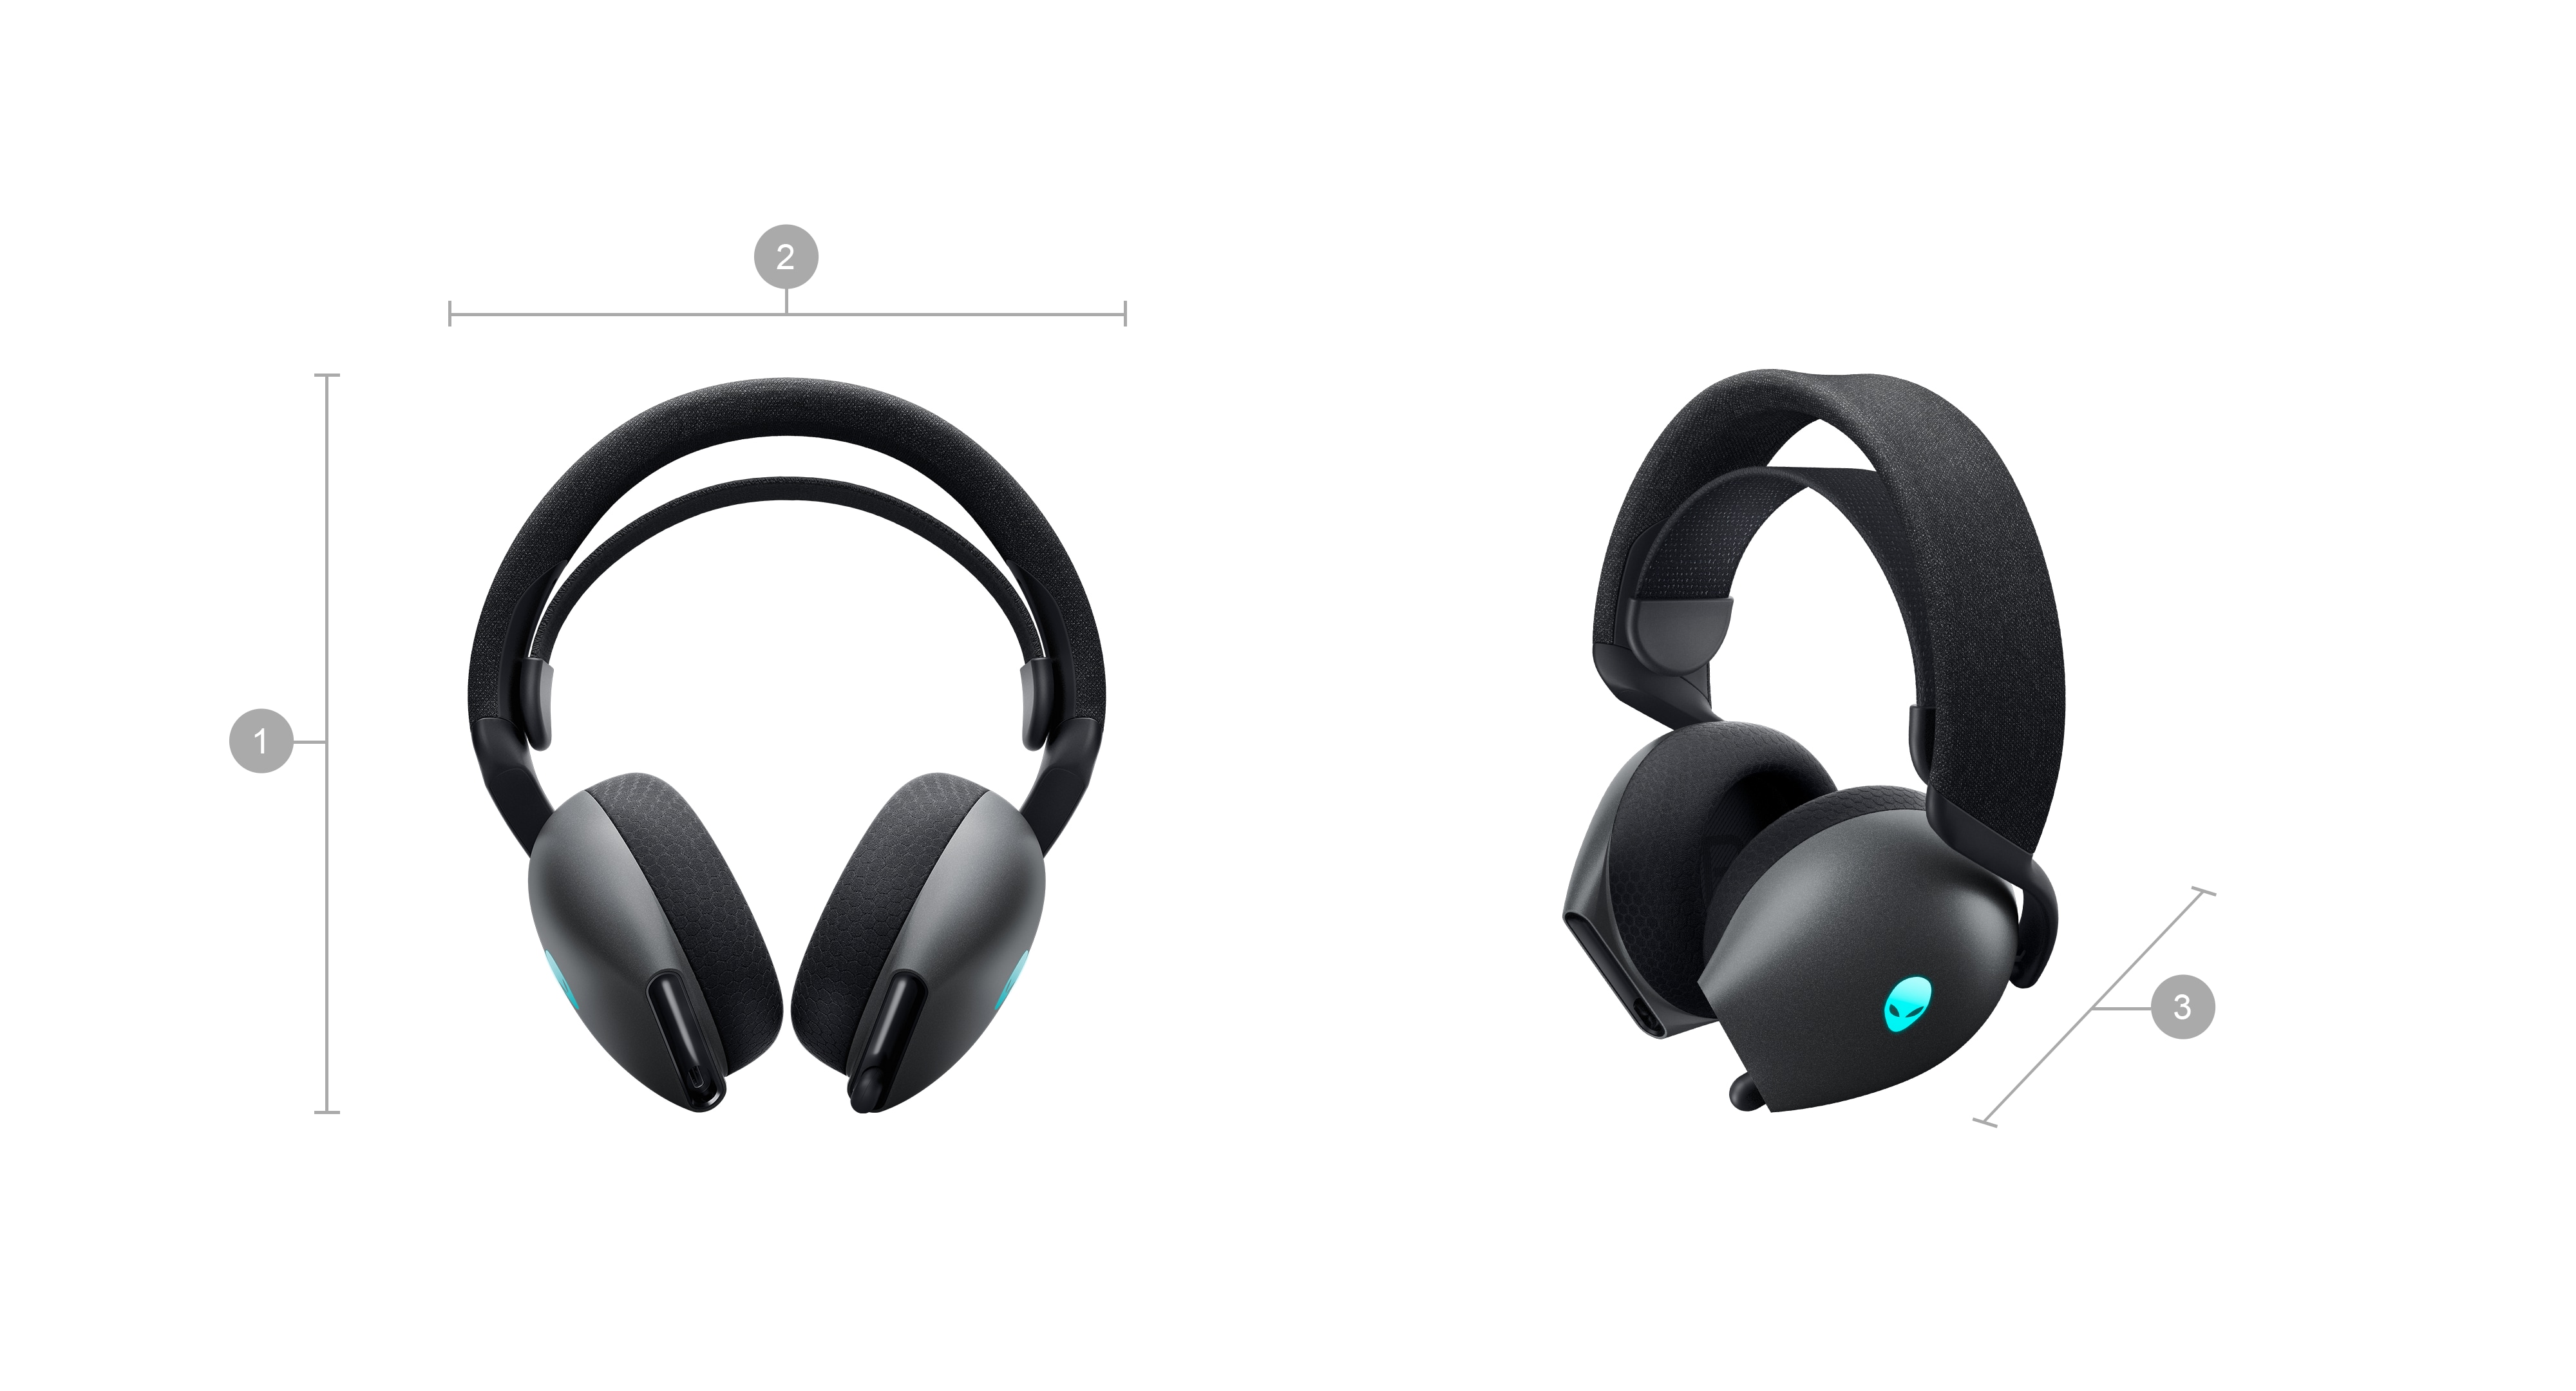 Dell Alienware AW720H Wireless Gaming Headsets with numbers from 1 to 3 showing the product dimensions and weight.